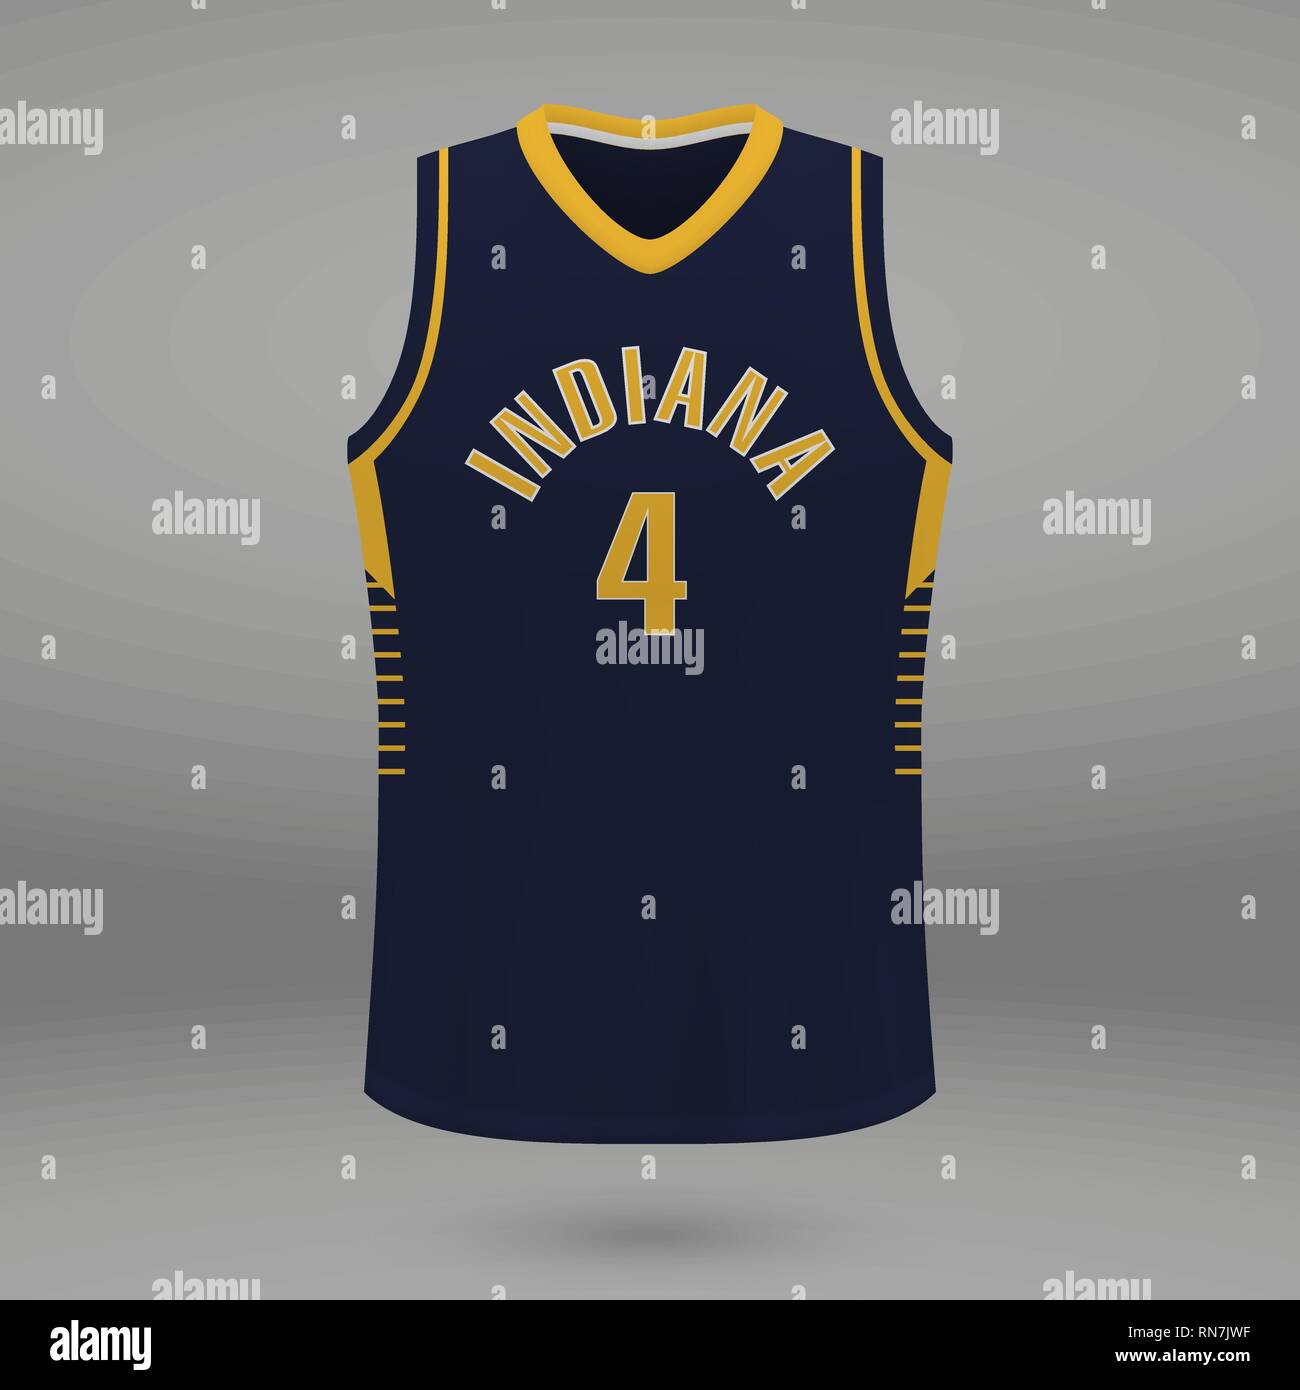 Indiana Pacers Merchandise, Jerseys, Apparel, Clothing